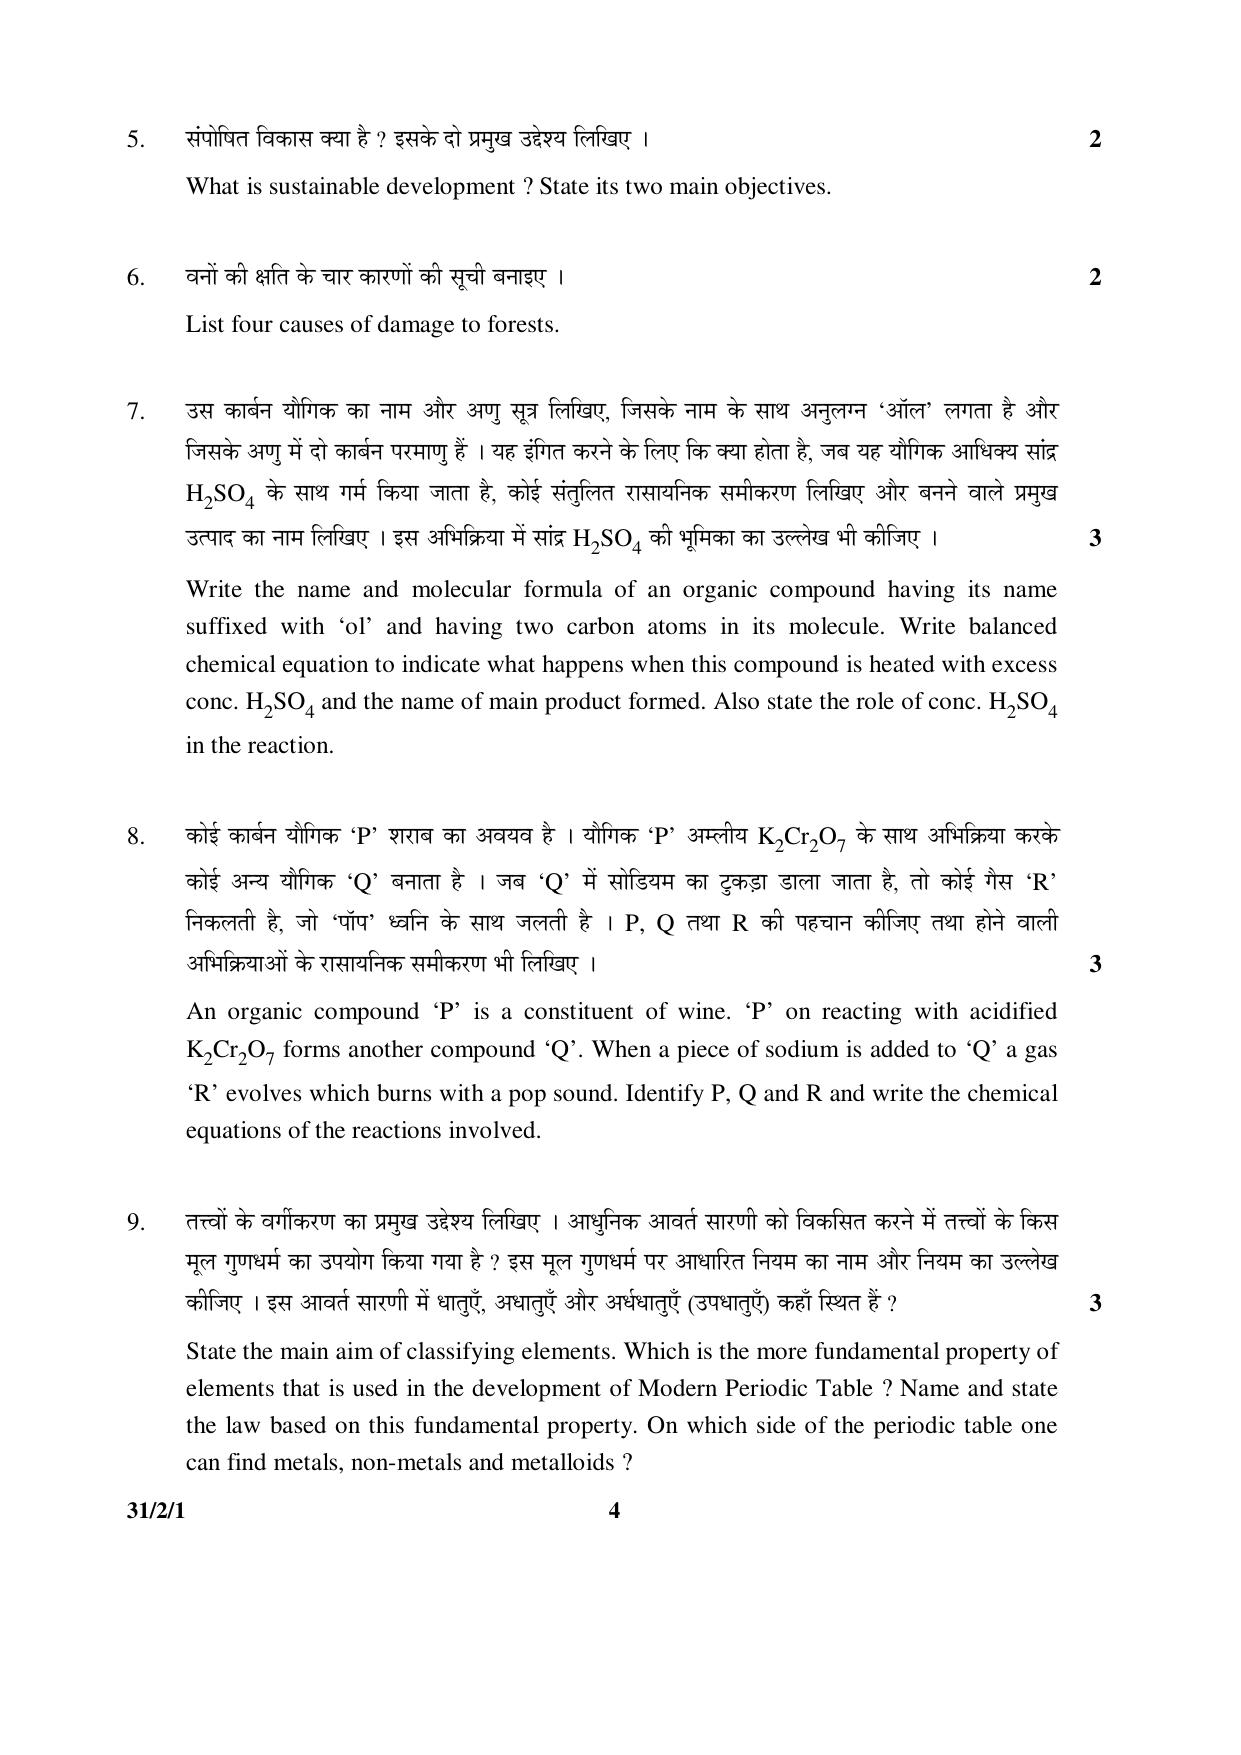 CBSE Class 10 31-2-1 _Science 2016 Question Paper - Page 4